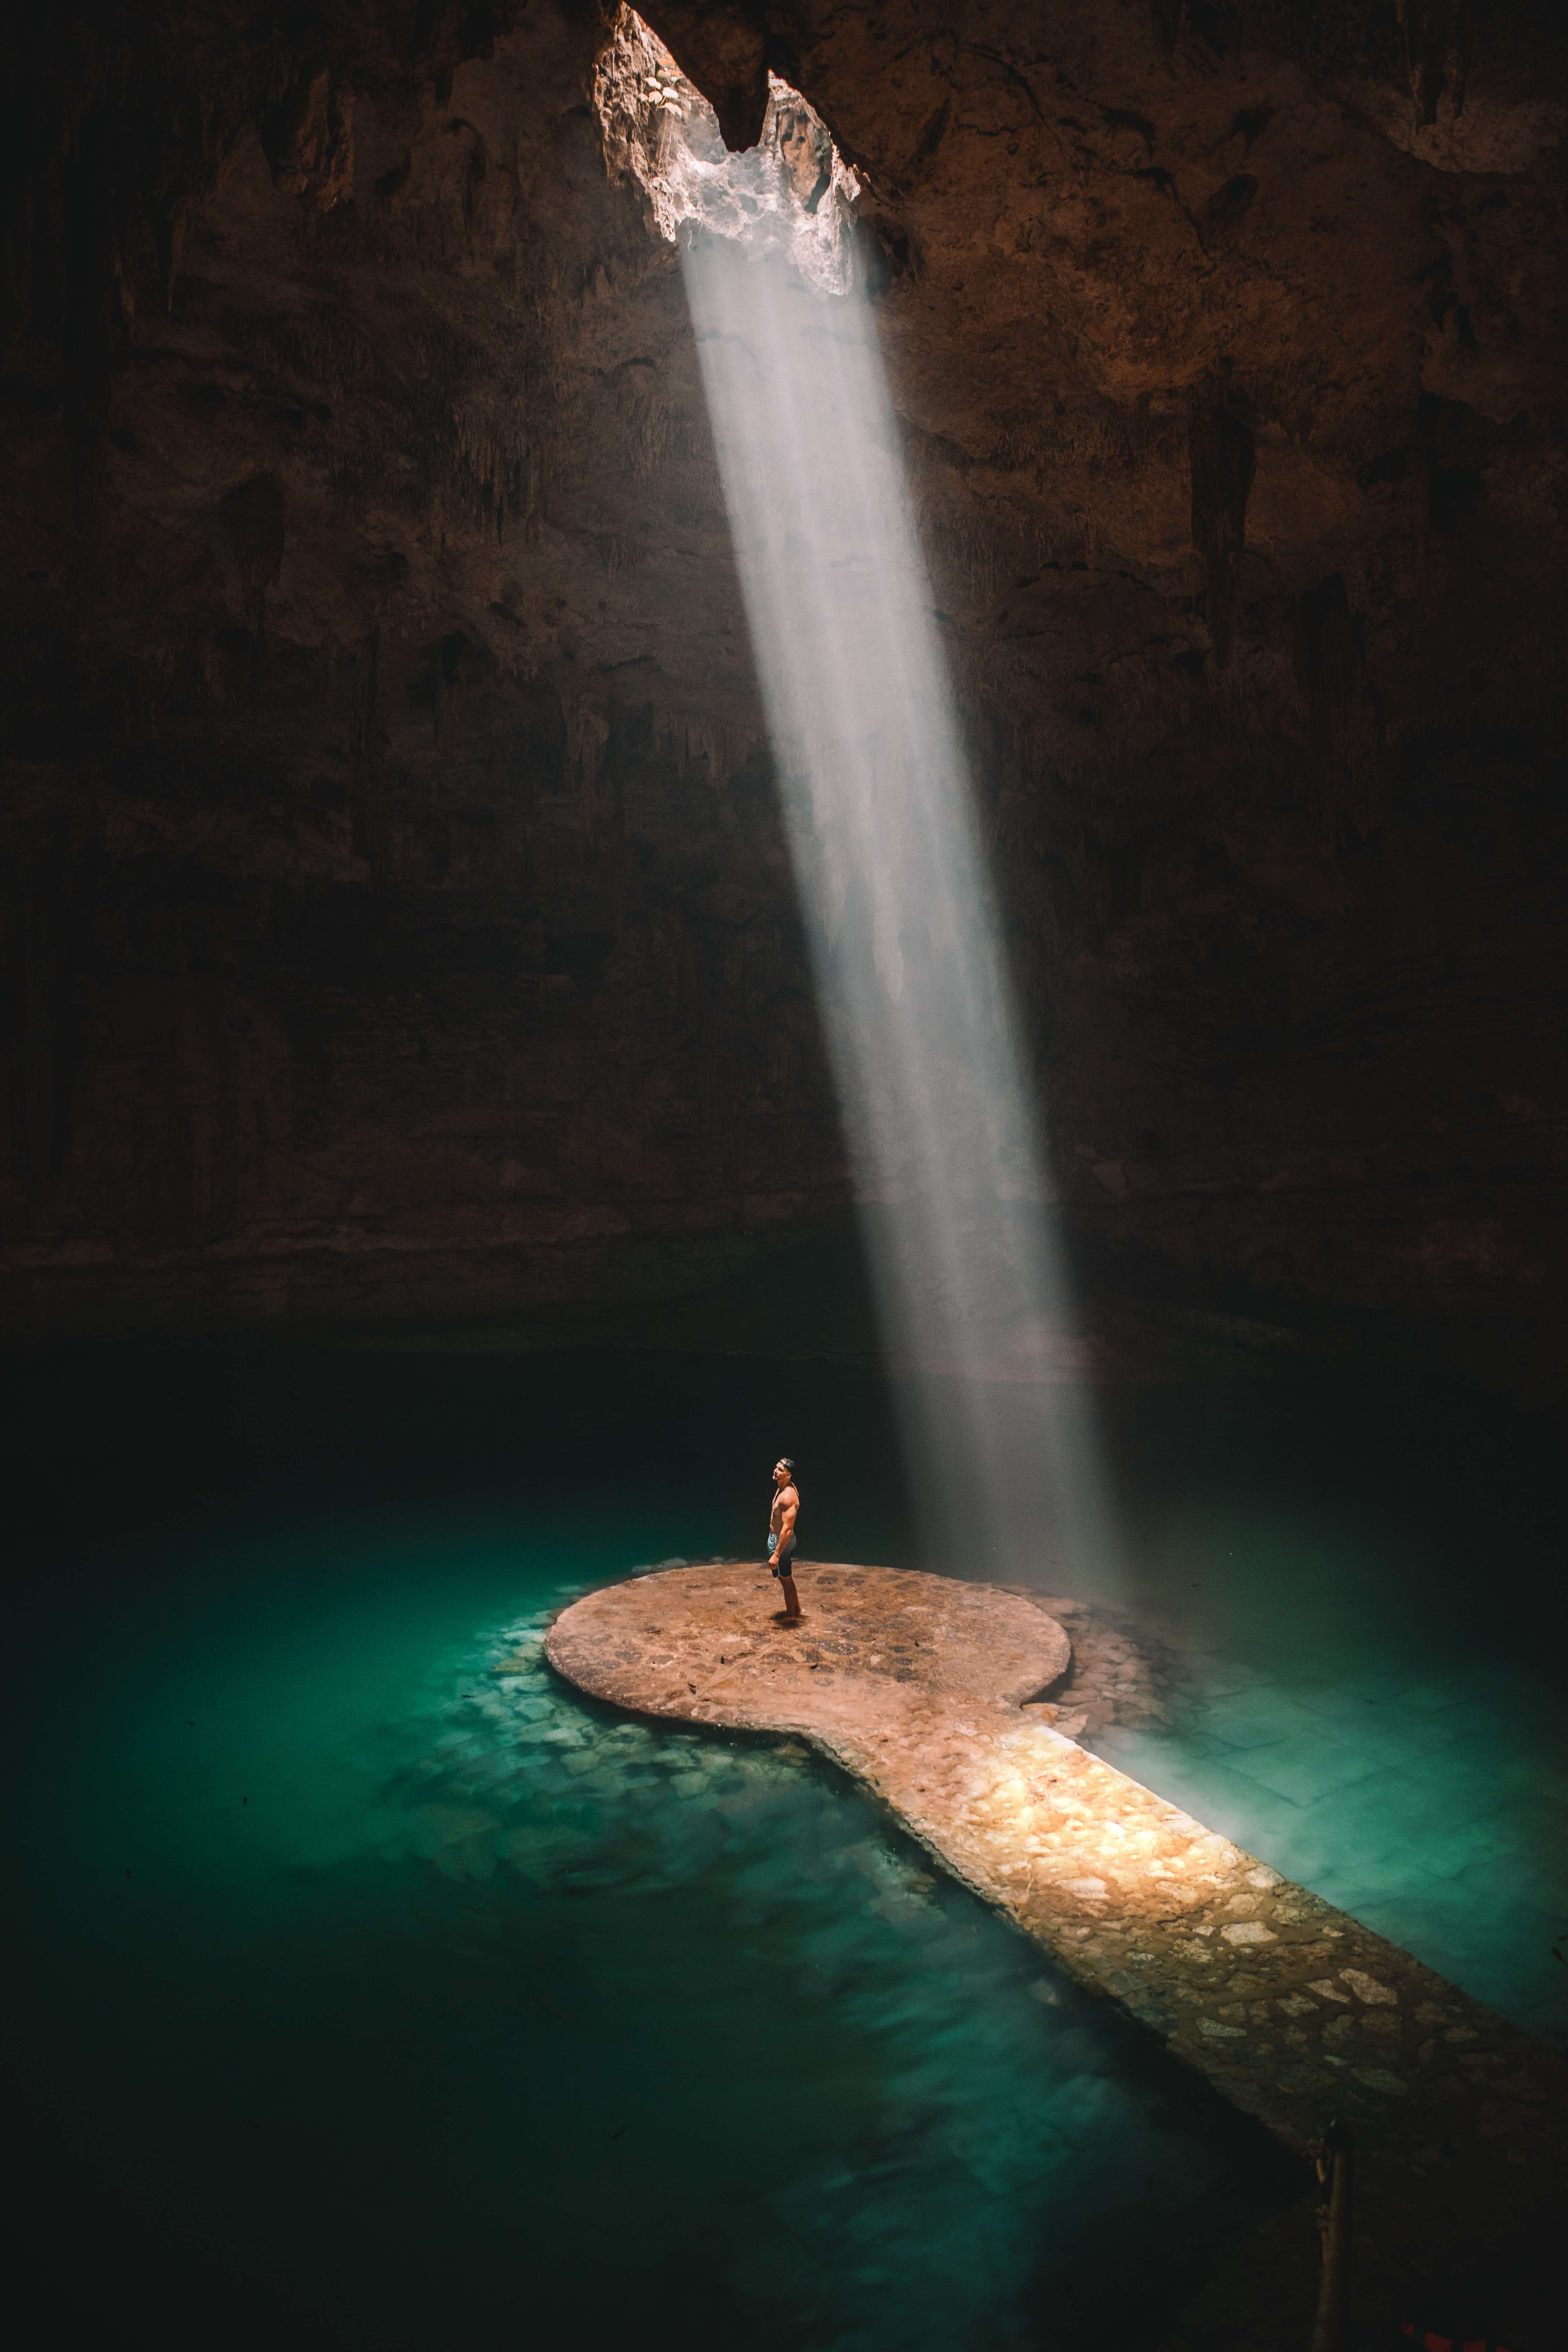 person on a small island in an underground cave